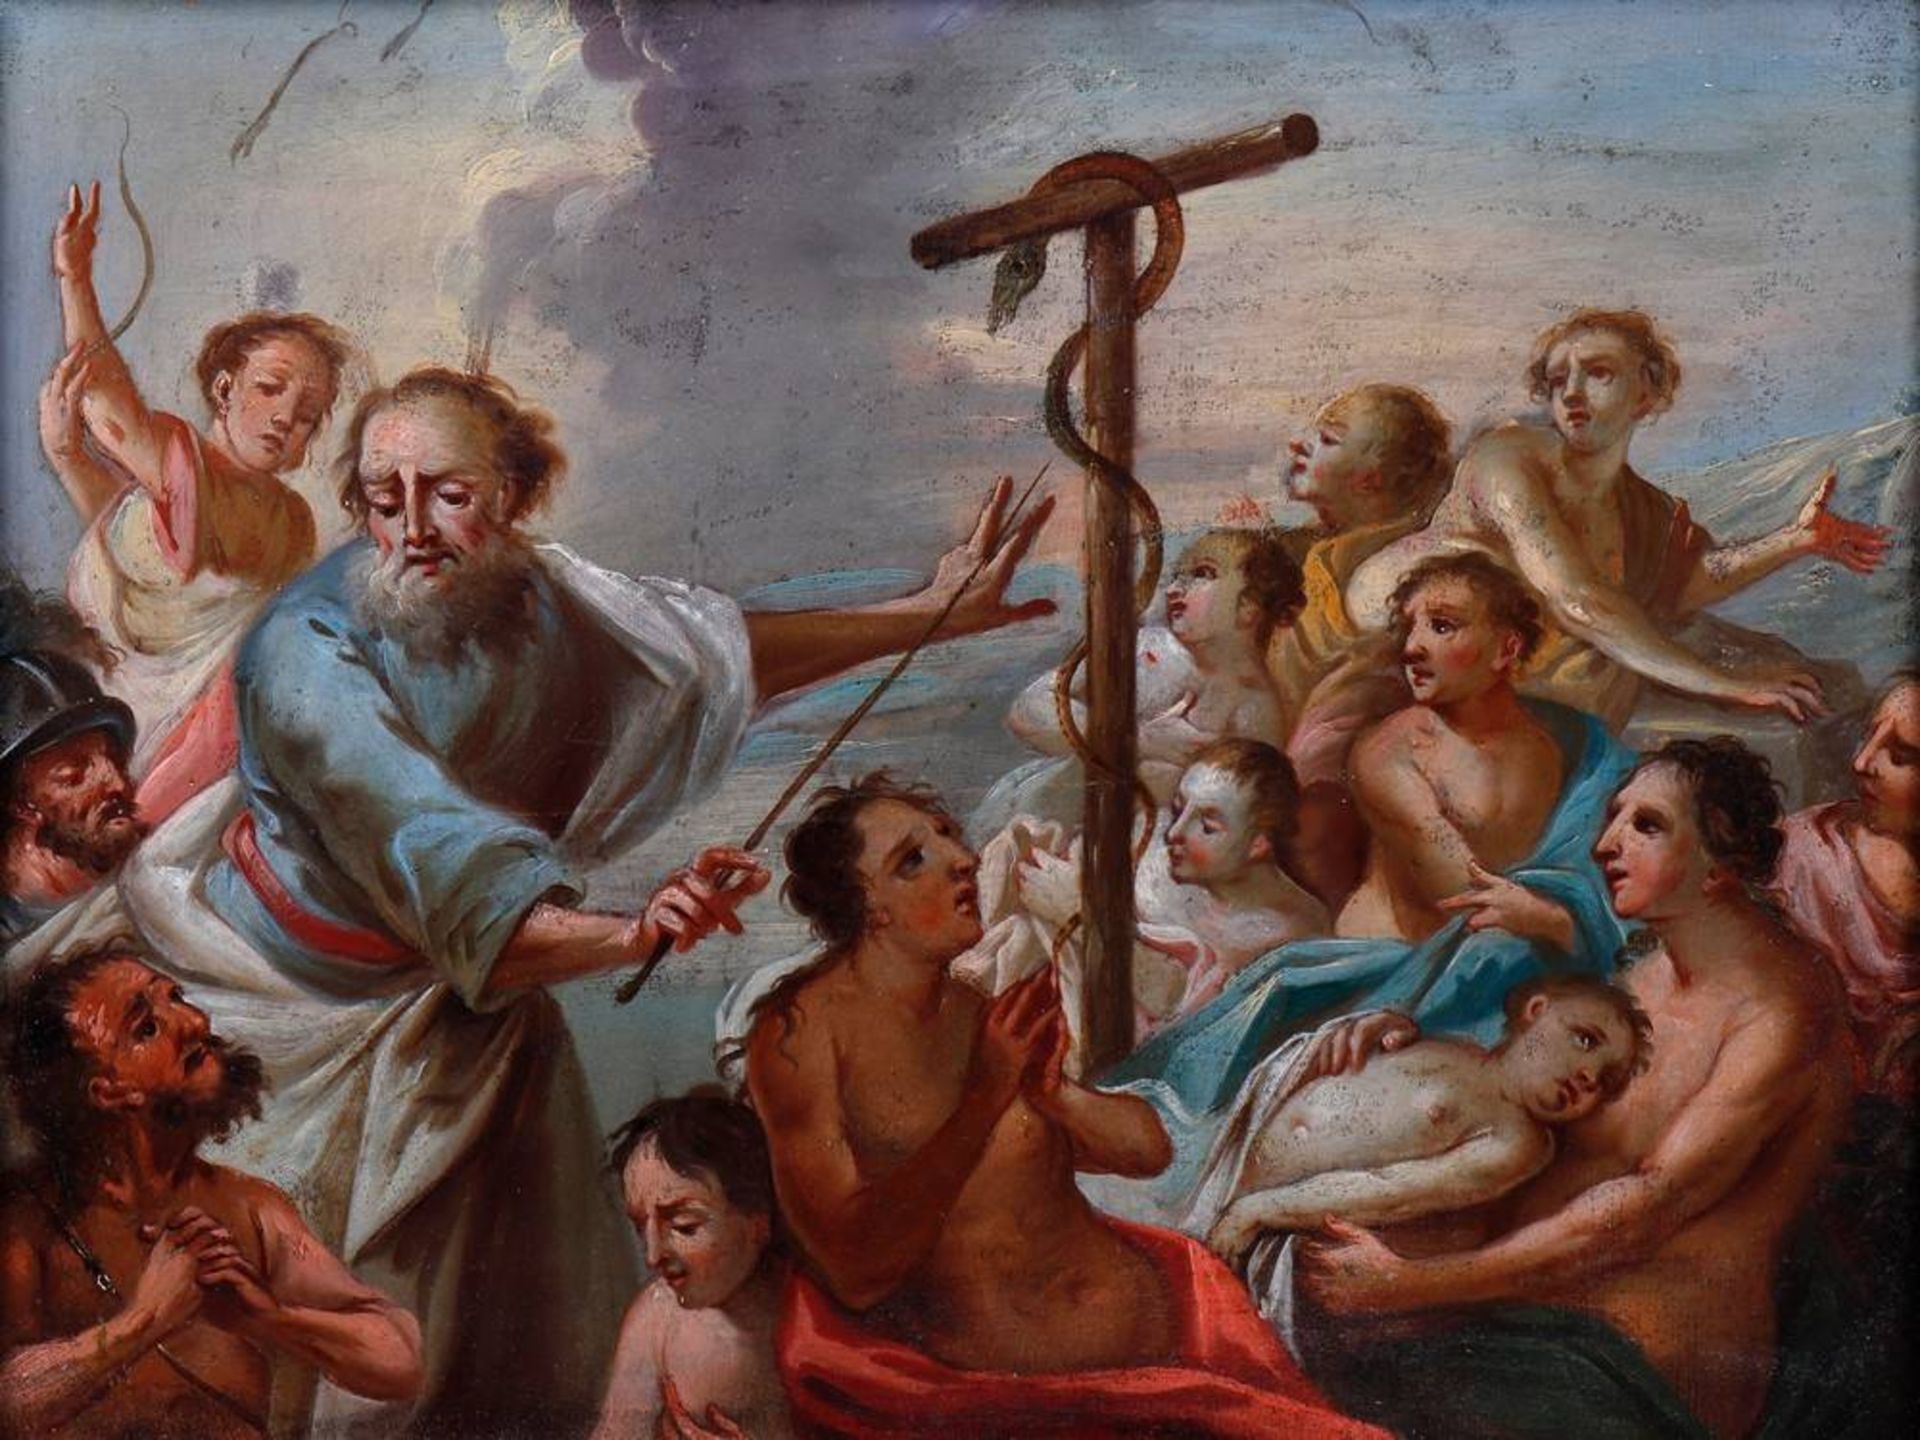 Moses with the Brazen Serpent, healing a group of the sick - Image 2 of 3